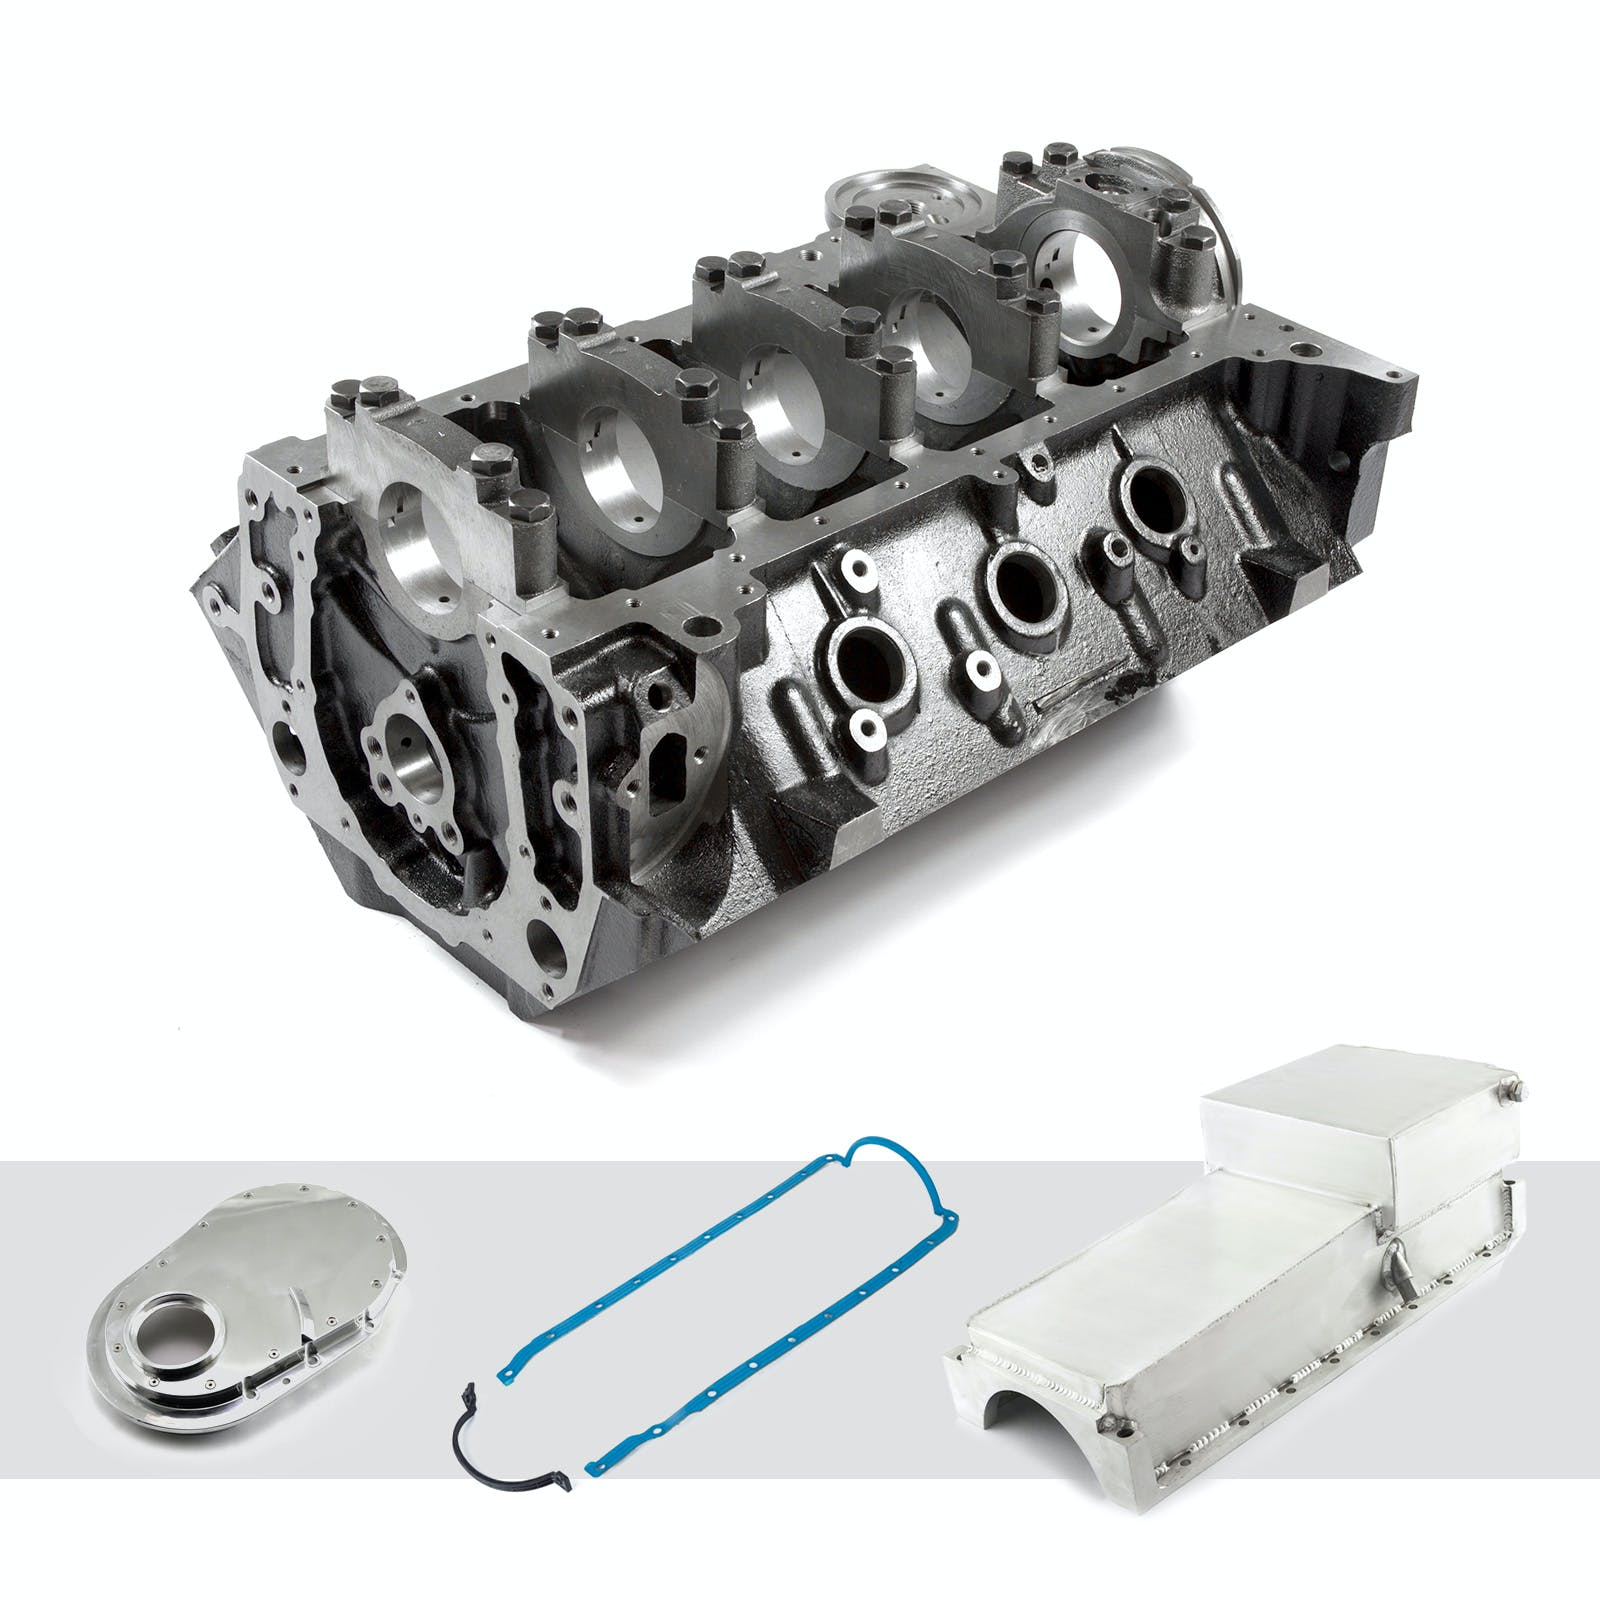 Speedmaster PCE286.1057 4-Bolt Billet Main Iron Engine Block Oil Pan and Timing Cover Kit